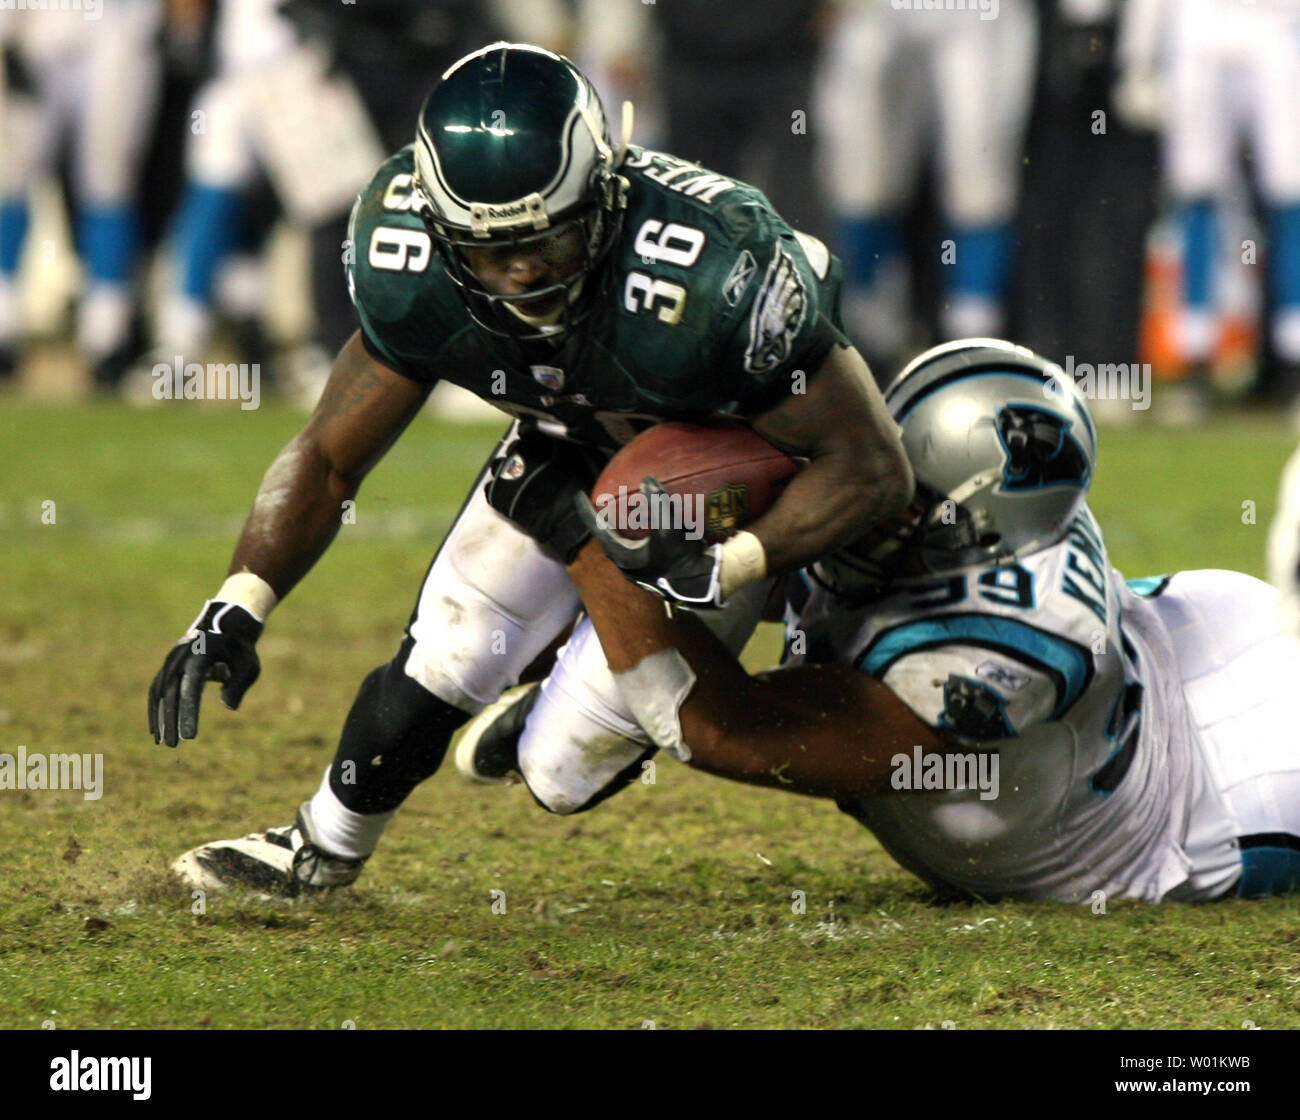 Philadelphia Eagles' running back Brian Westbrook (36) loses a yard as he tries to go through the middle and is dragged down on the Carolina seven yard line by Carolina Panthers Maake Kemoeatu (99) during the fourth quarter at Lincoln Field Philadelphia on December 4, 2006. Philadelphia defeated Carolina 27-24.   (UPI Photo/John Anderson) Stock Photo